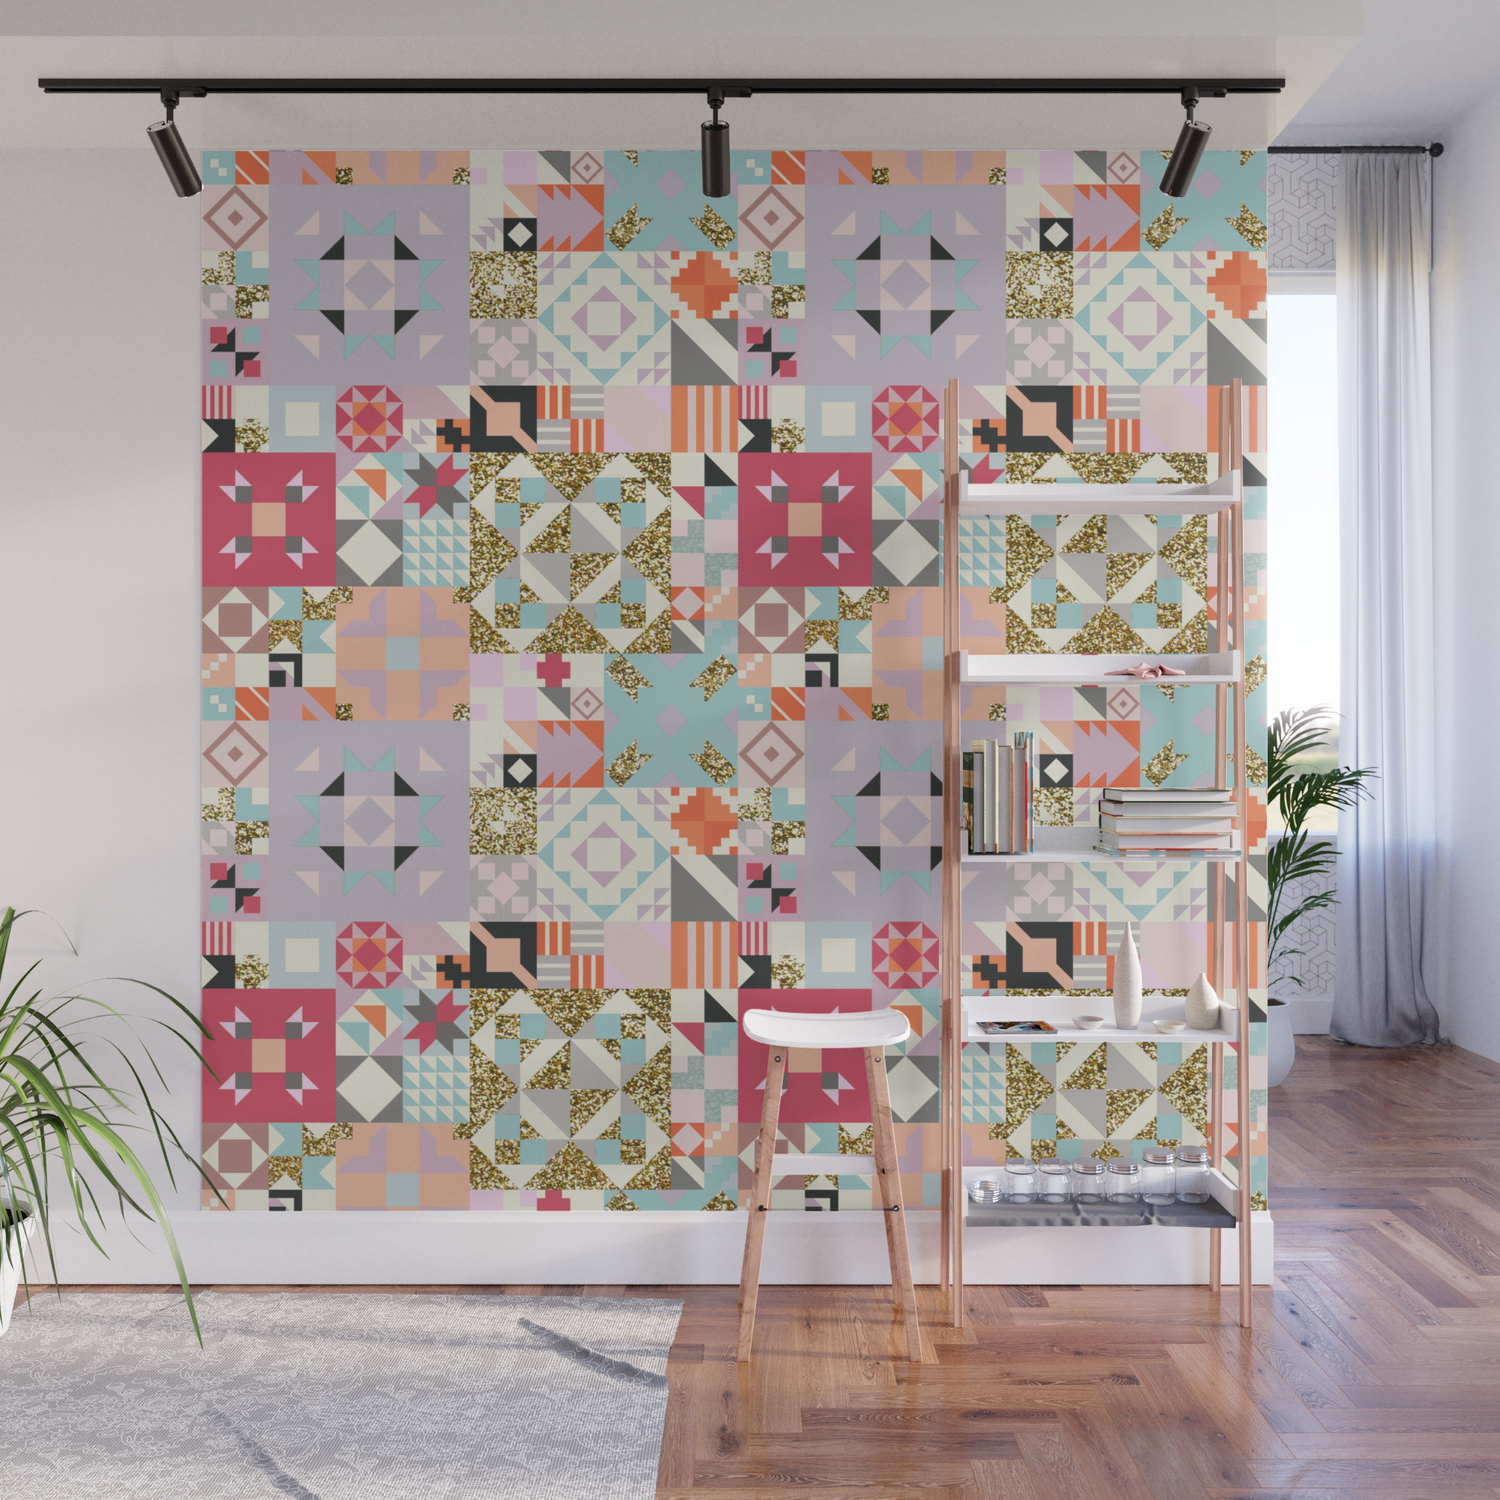 Moroccan Quilt Pattern Wall Mural By Piplulu Society6,Simple Cross Country Shirt Designs